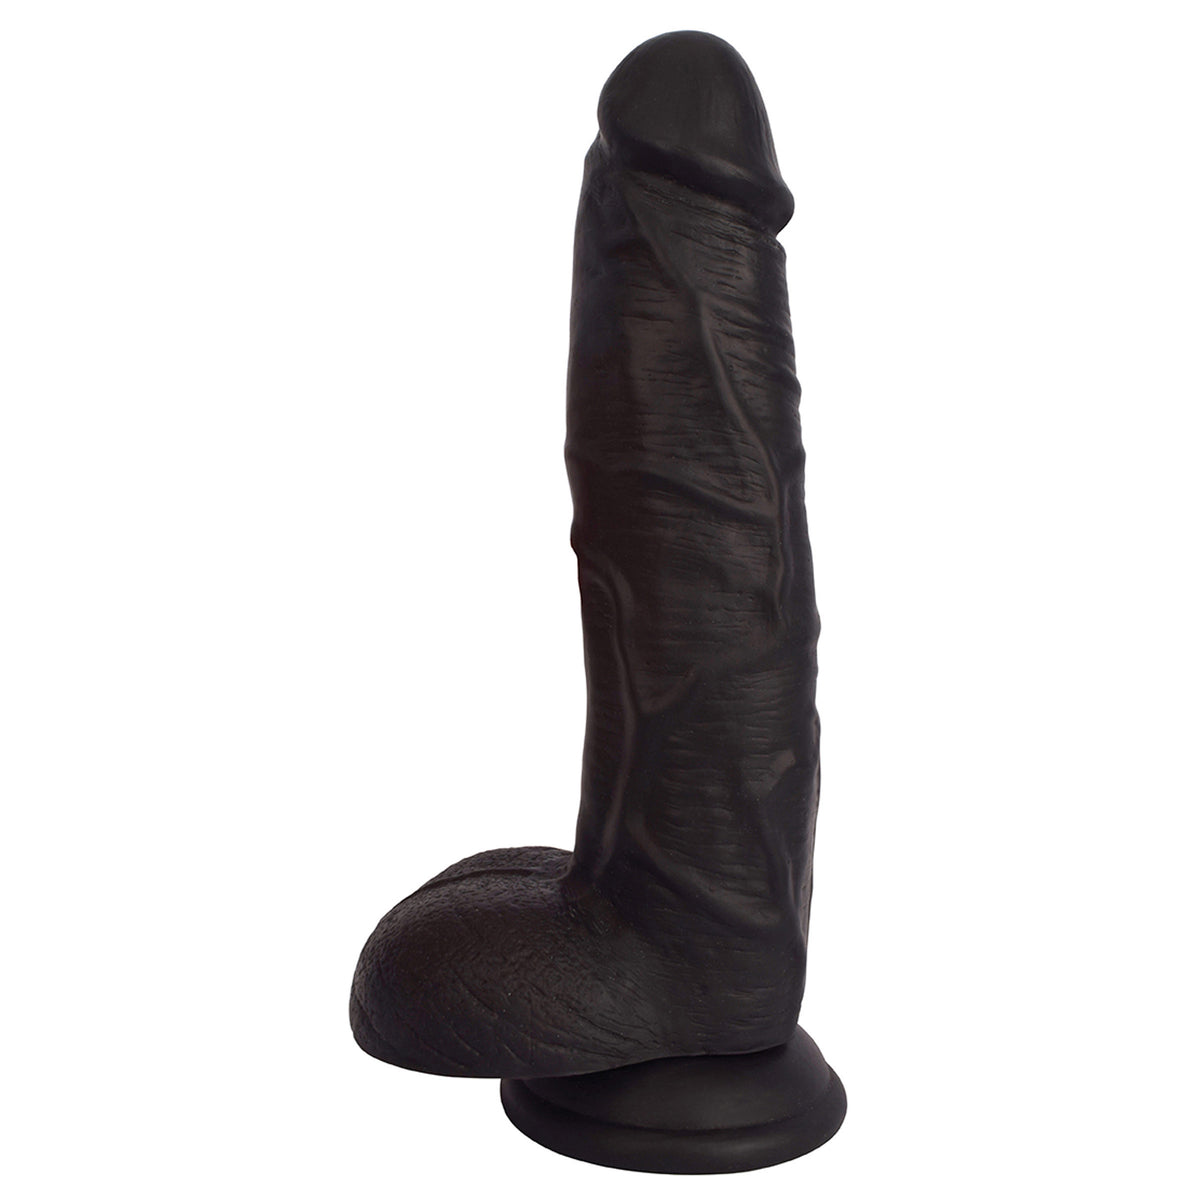 JOCK 9 Inch Dong with Balls - Black